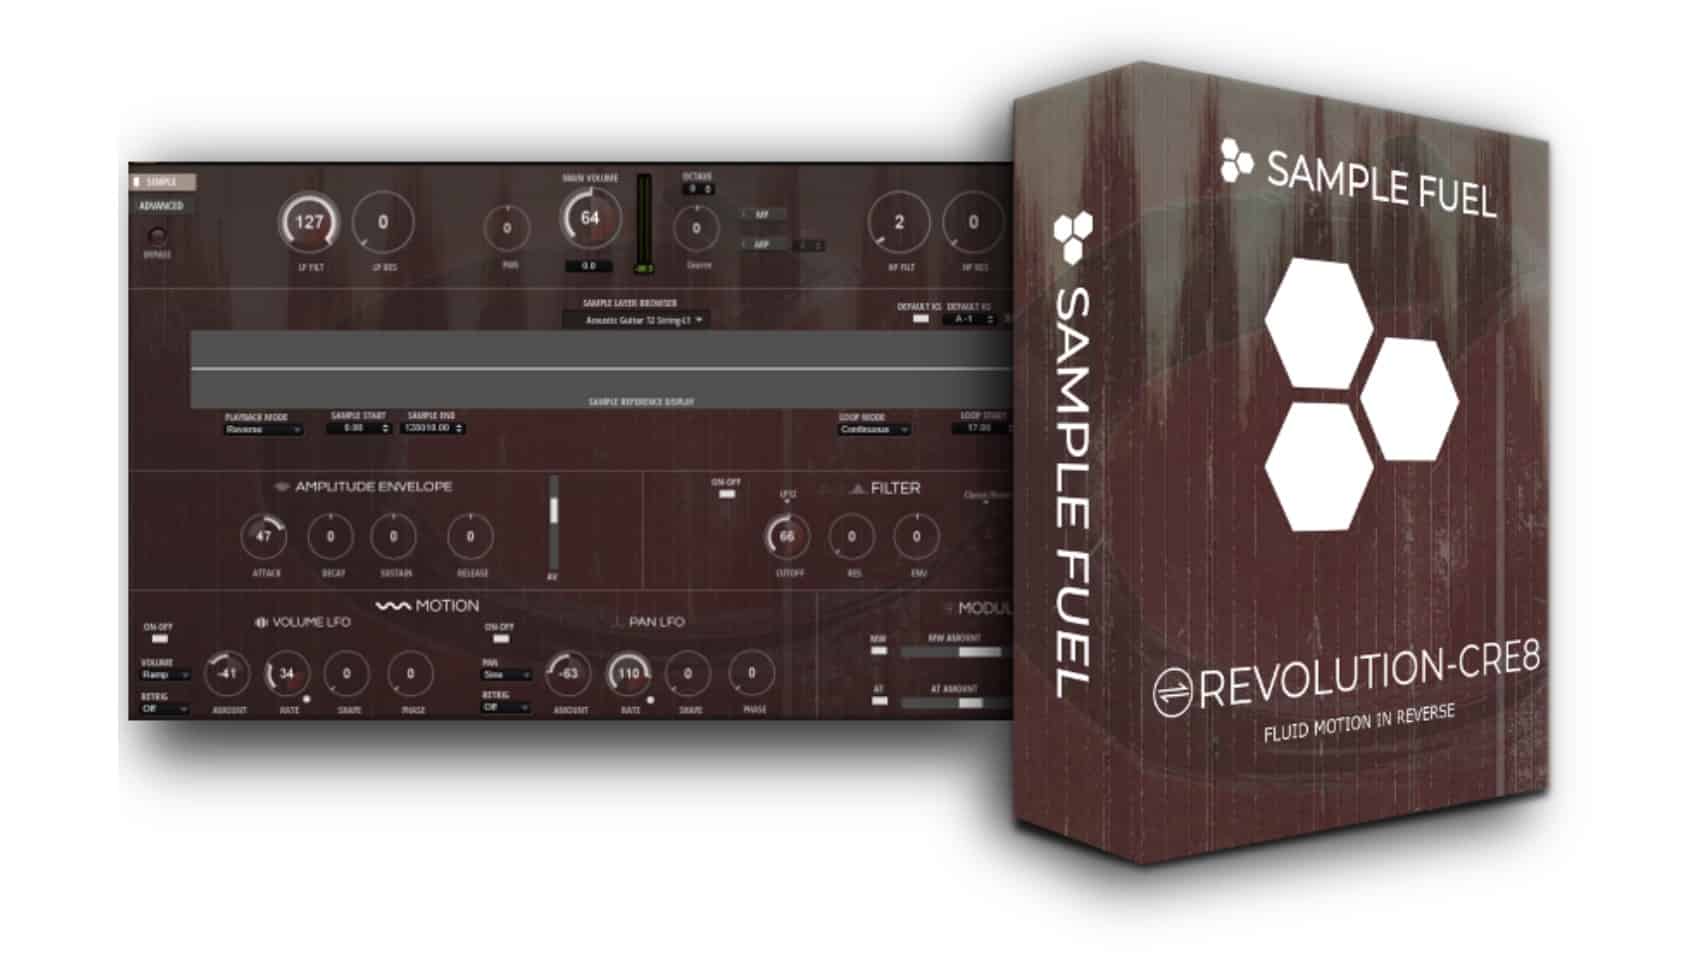 REVOLUTION-CRE8 2.0 by SAMPLE FUEL – Free Update to Version 2